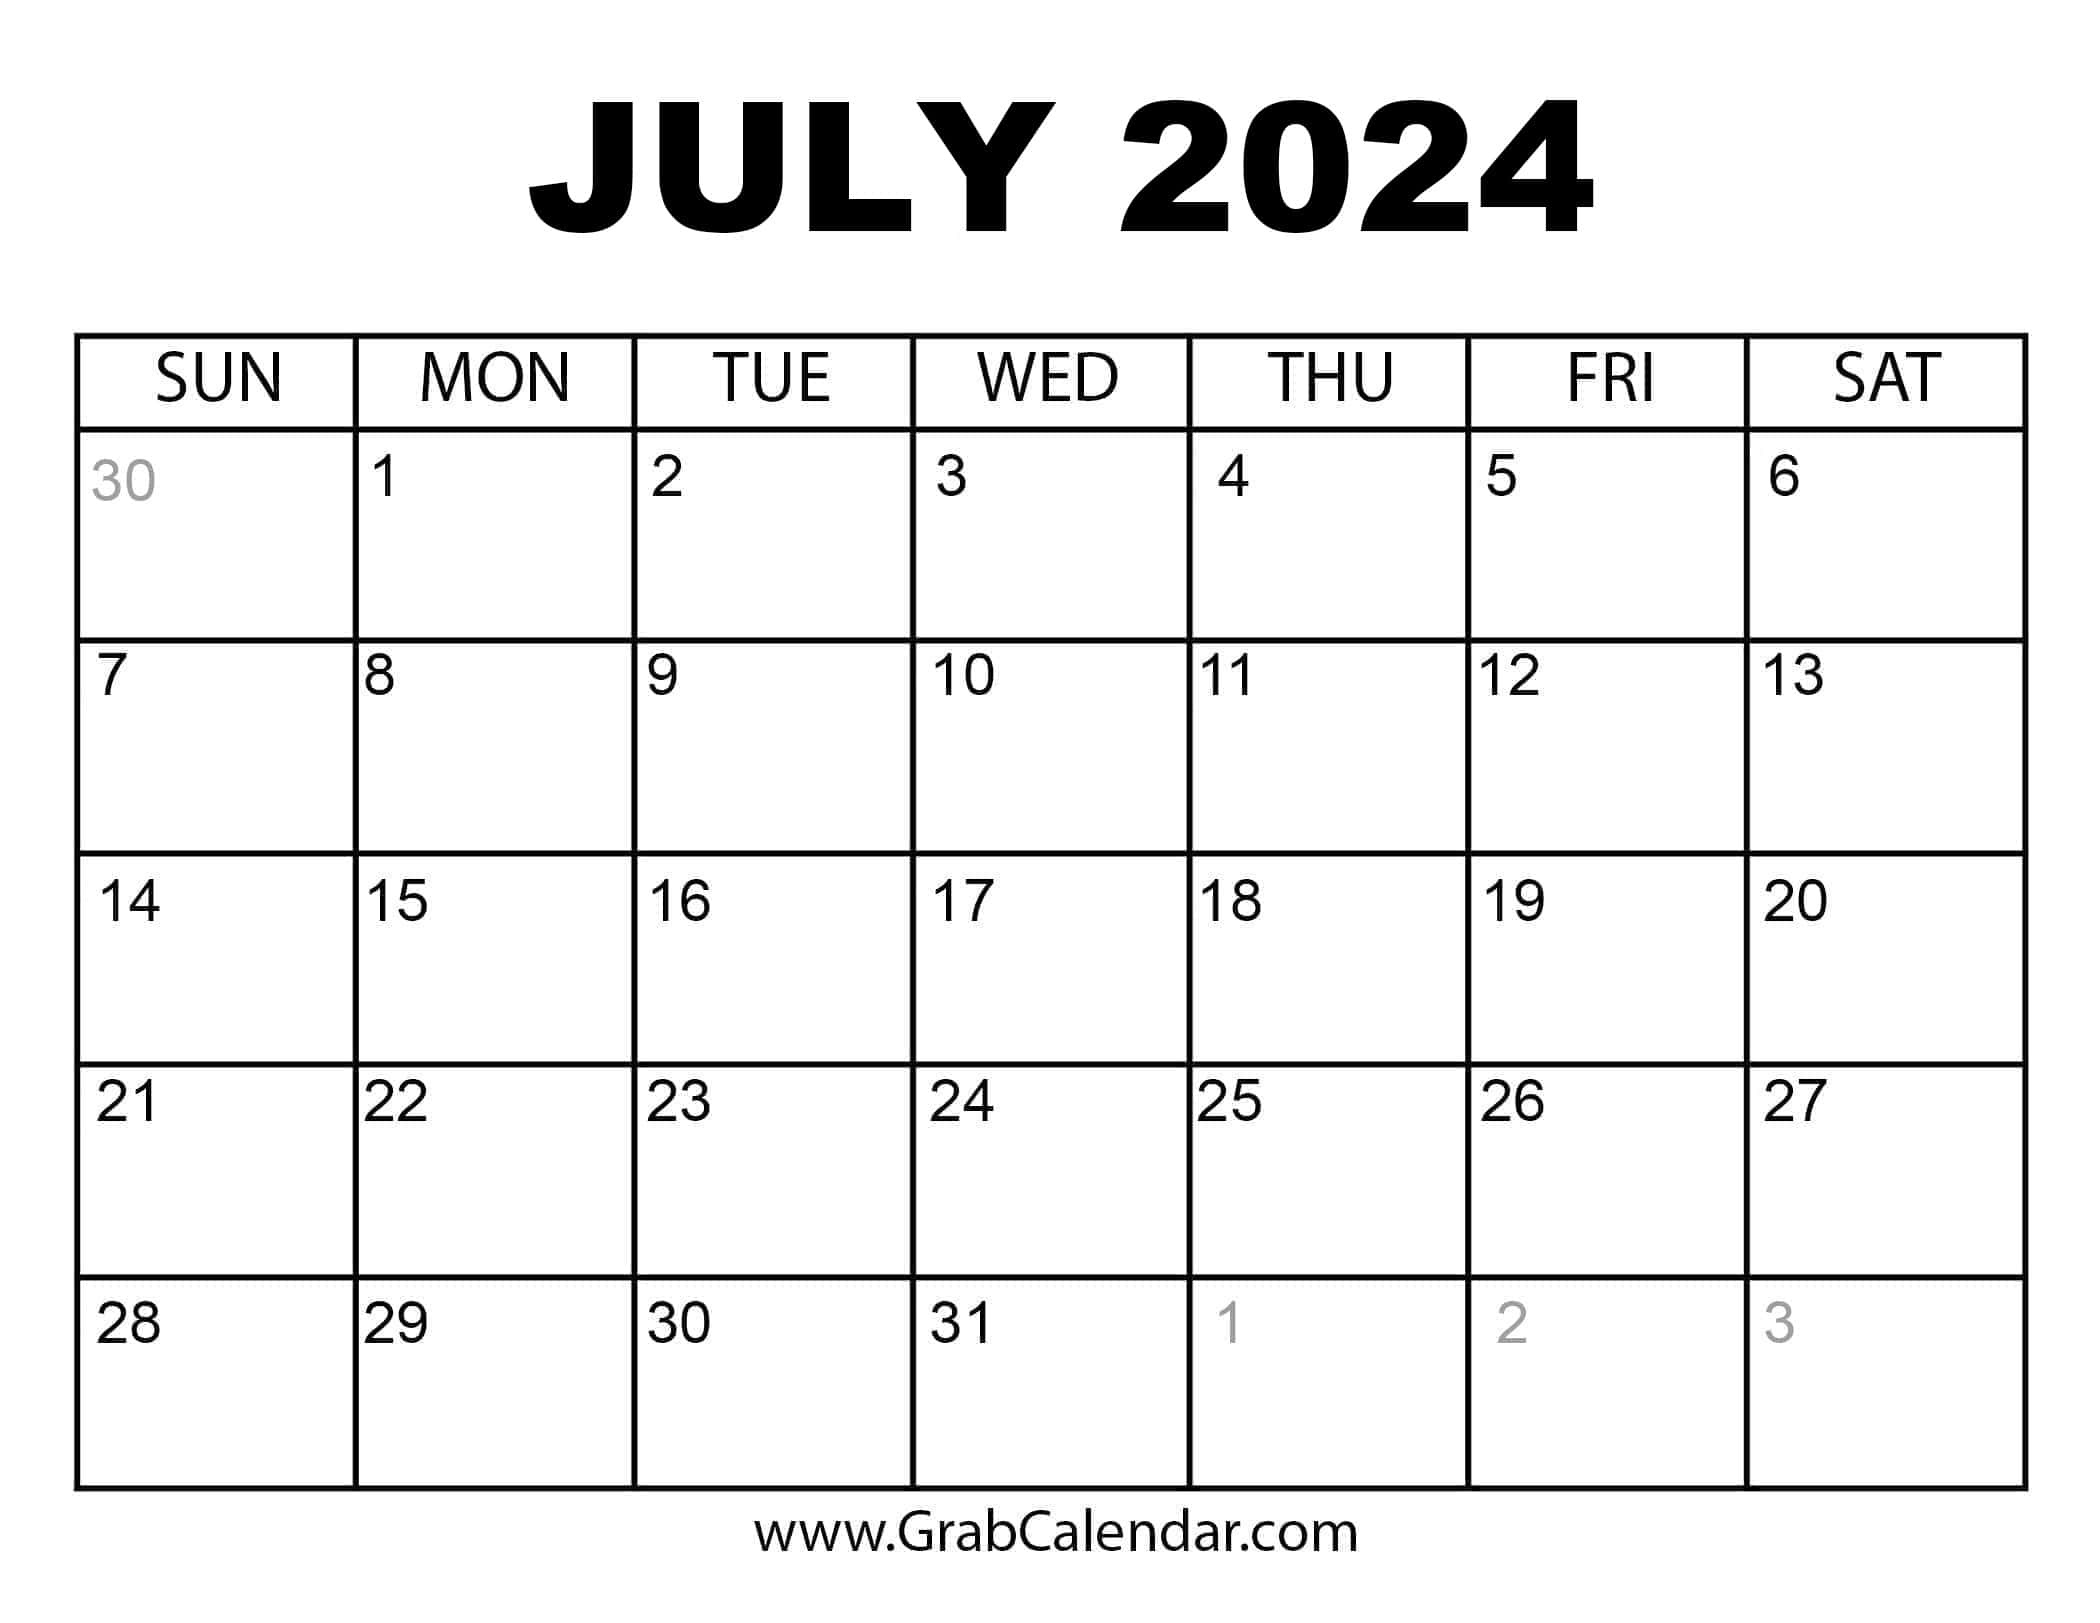 Printable July 2024 Calendar within July 2024 Calender